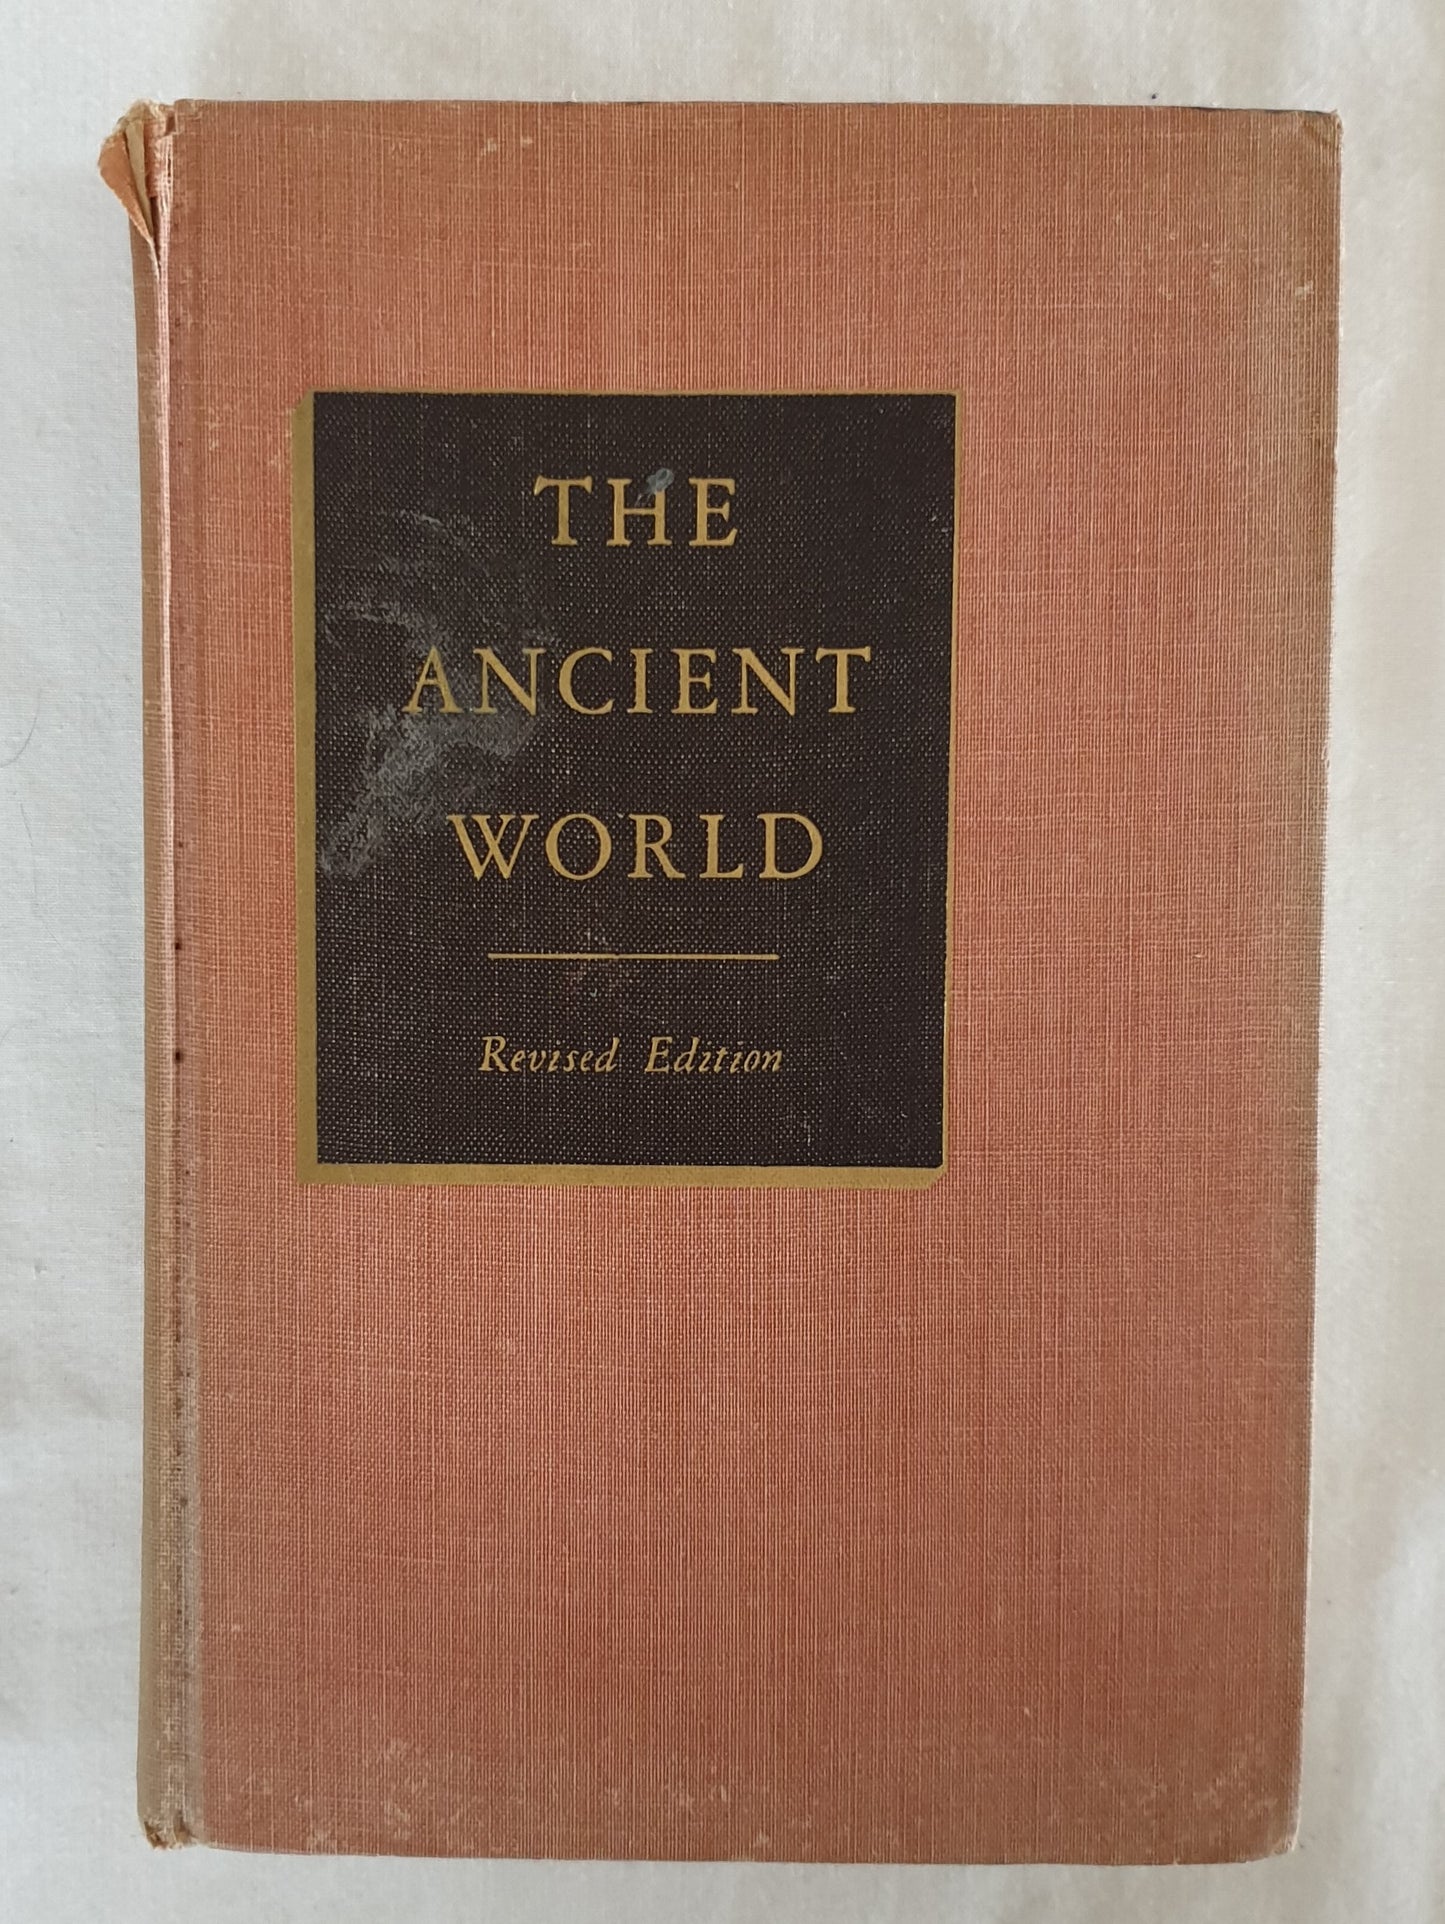 The Ancient World by Wallace Everett Caldwell